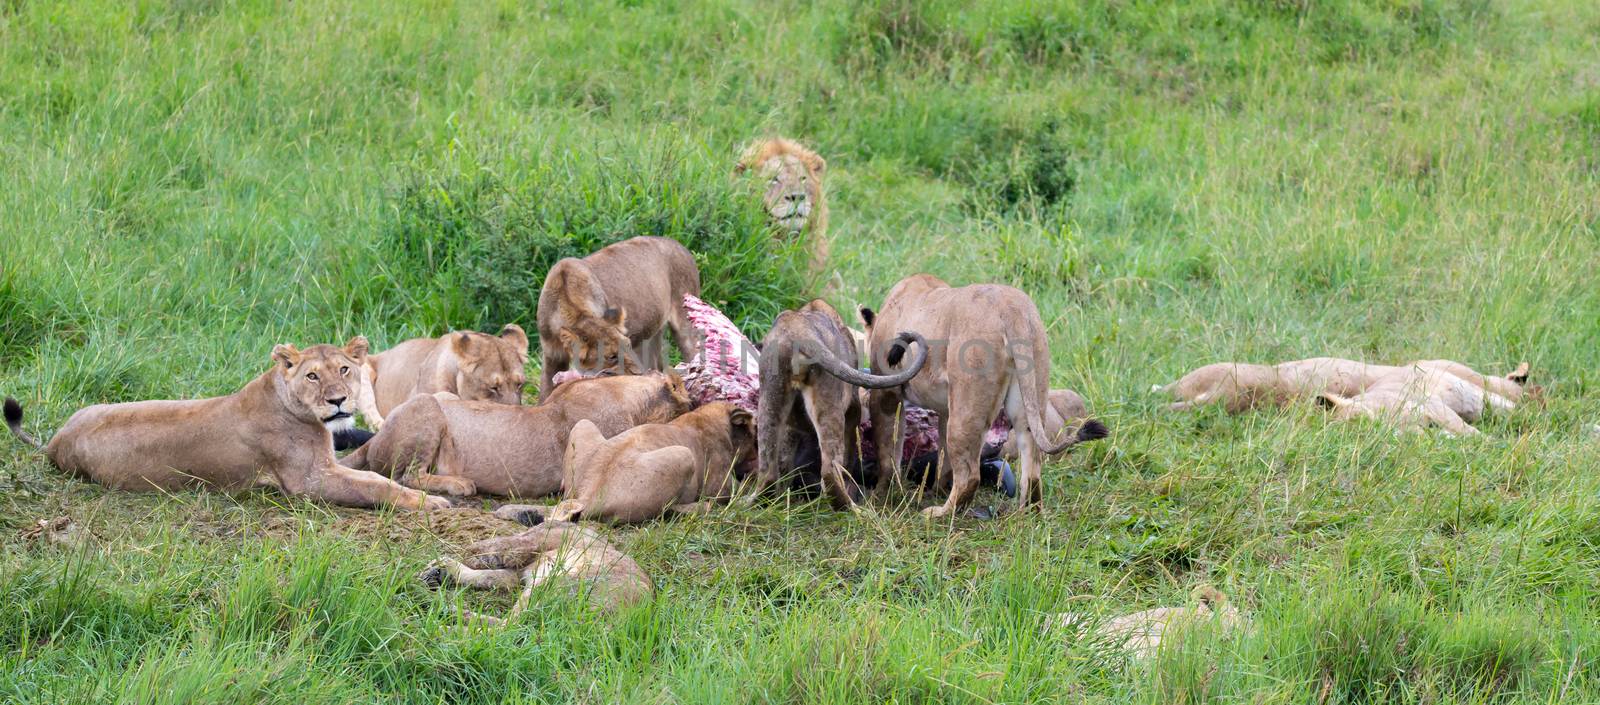 The lion family is eating a buffalo between tall grass